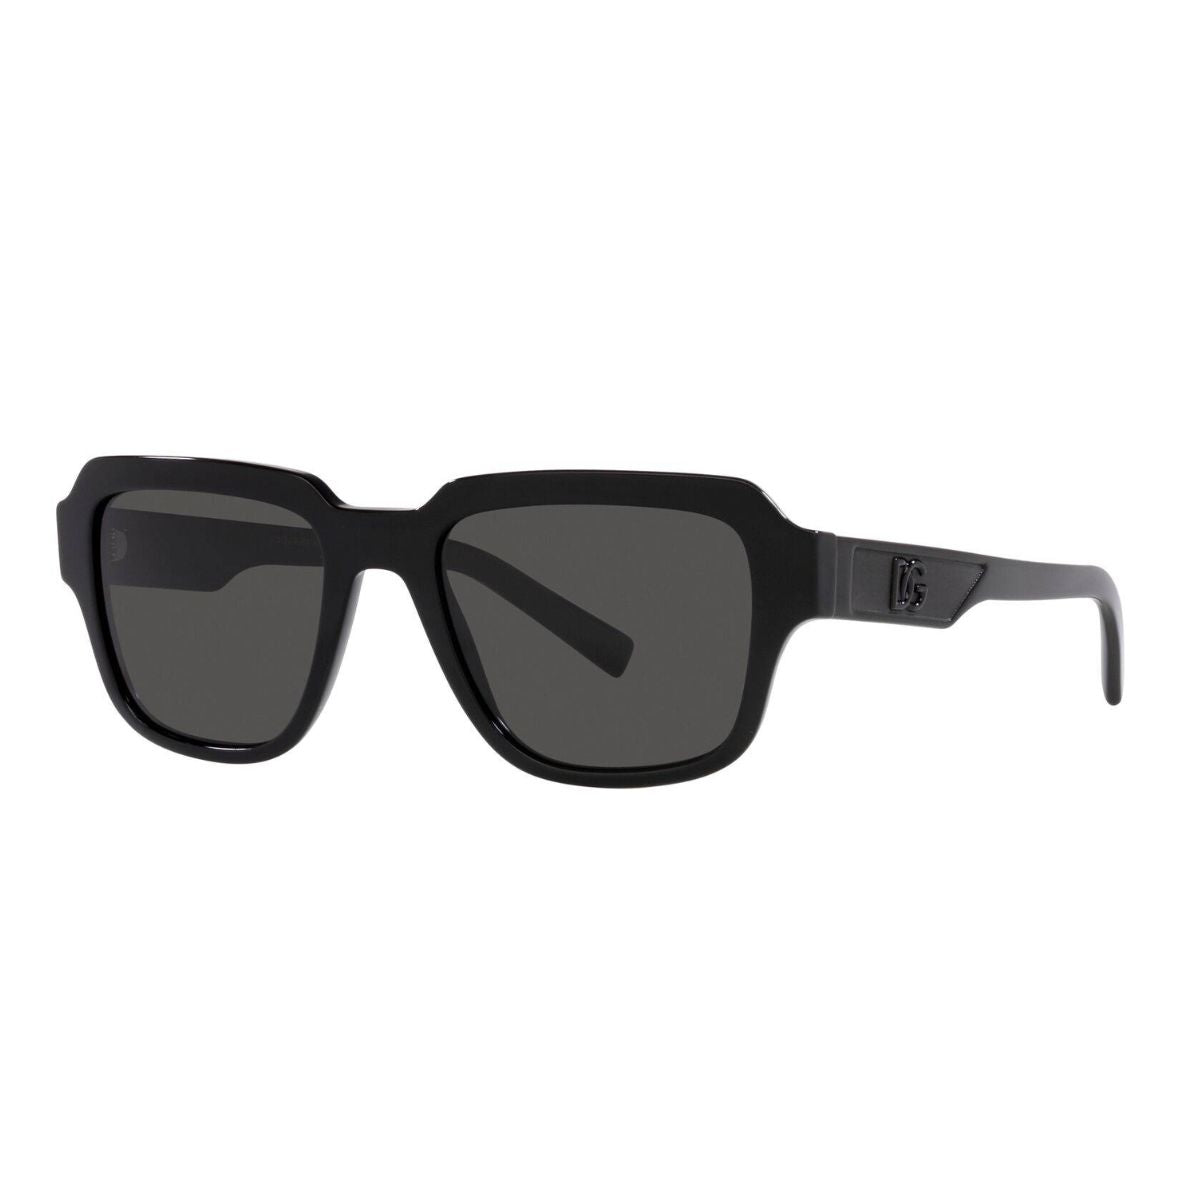 "Elevate your style effortlessly with Dolce & Gabbana DG4402 501/87 sunglasses for men."